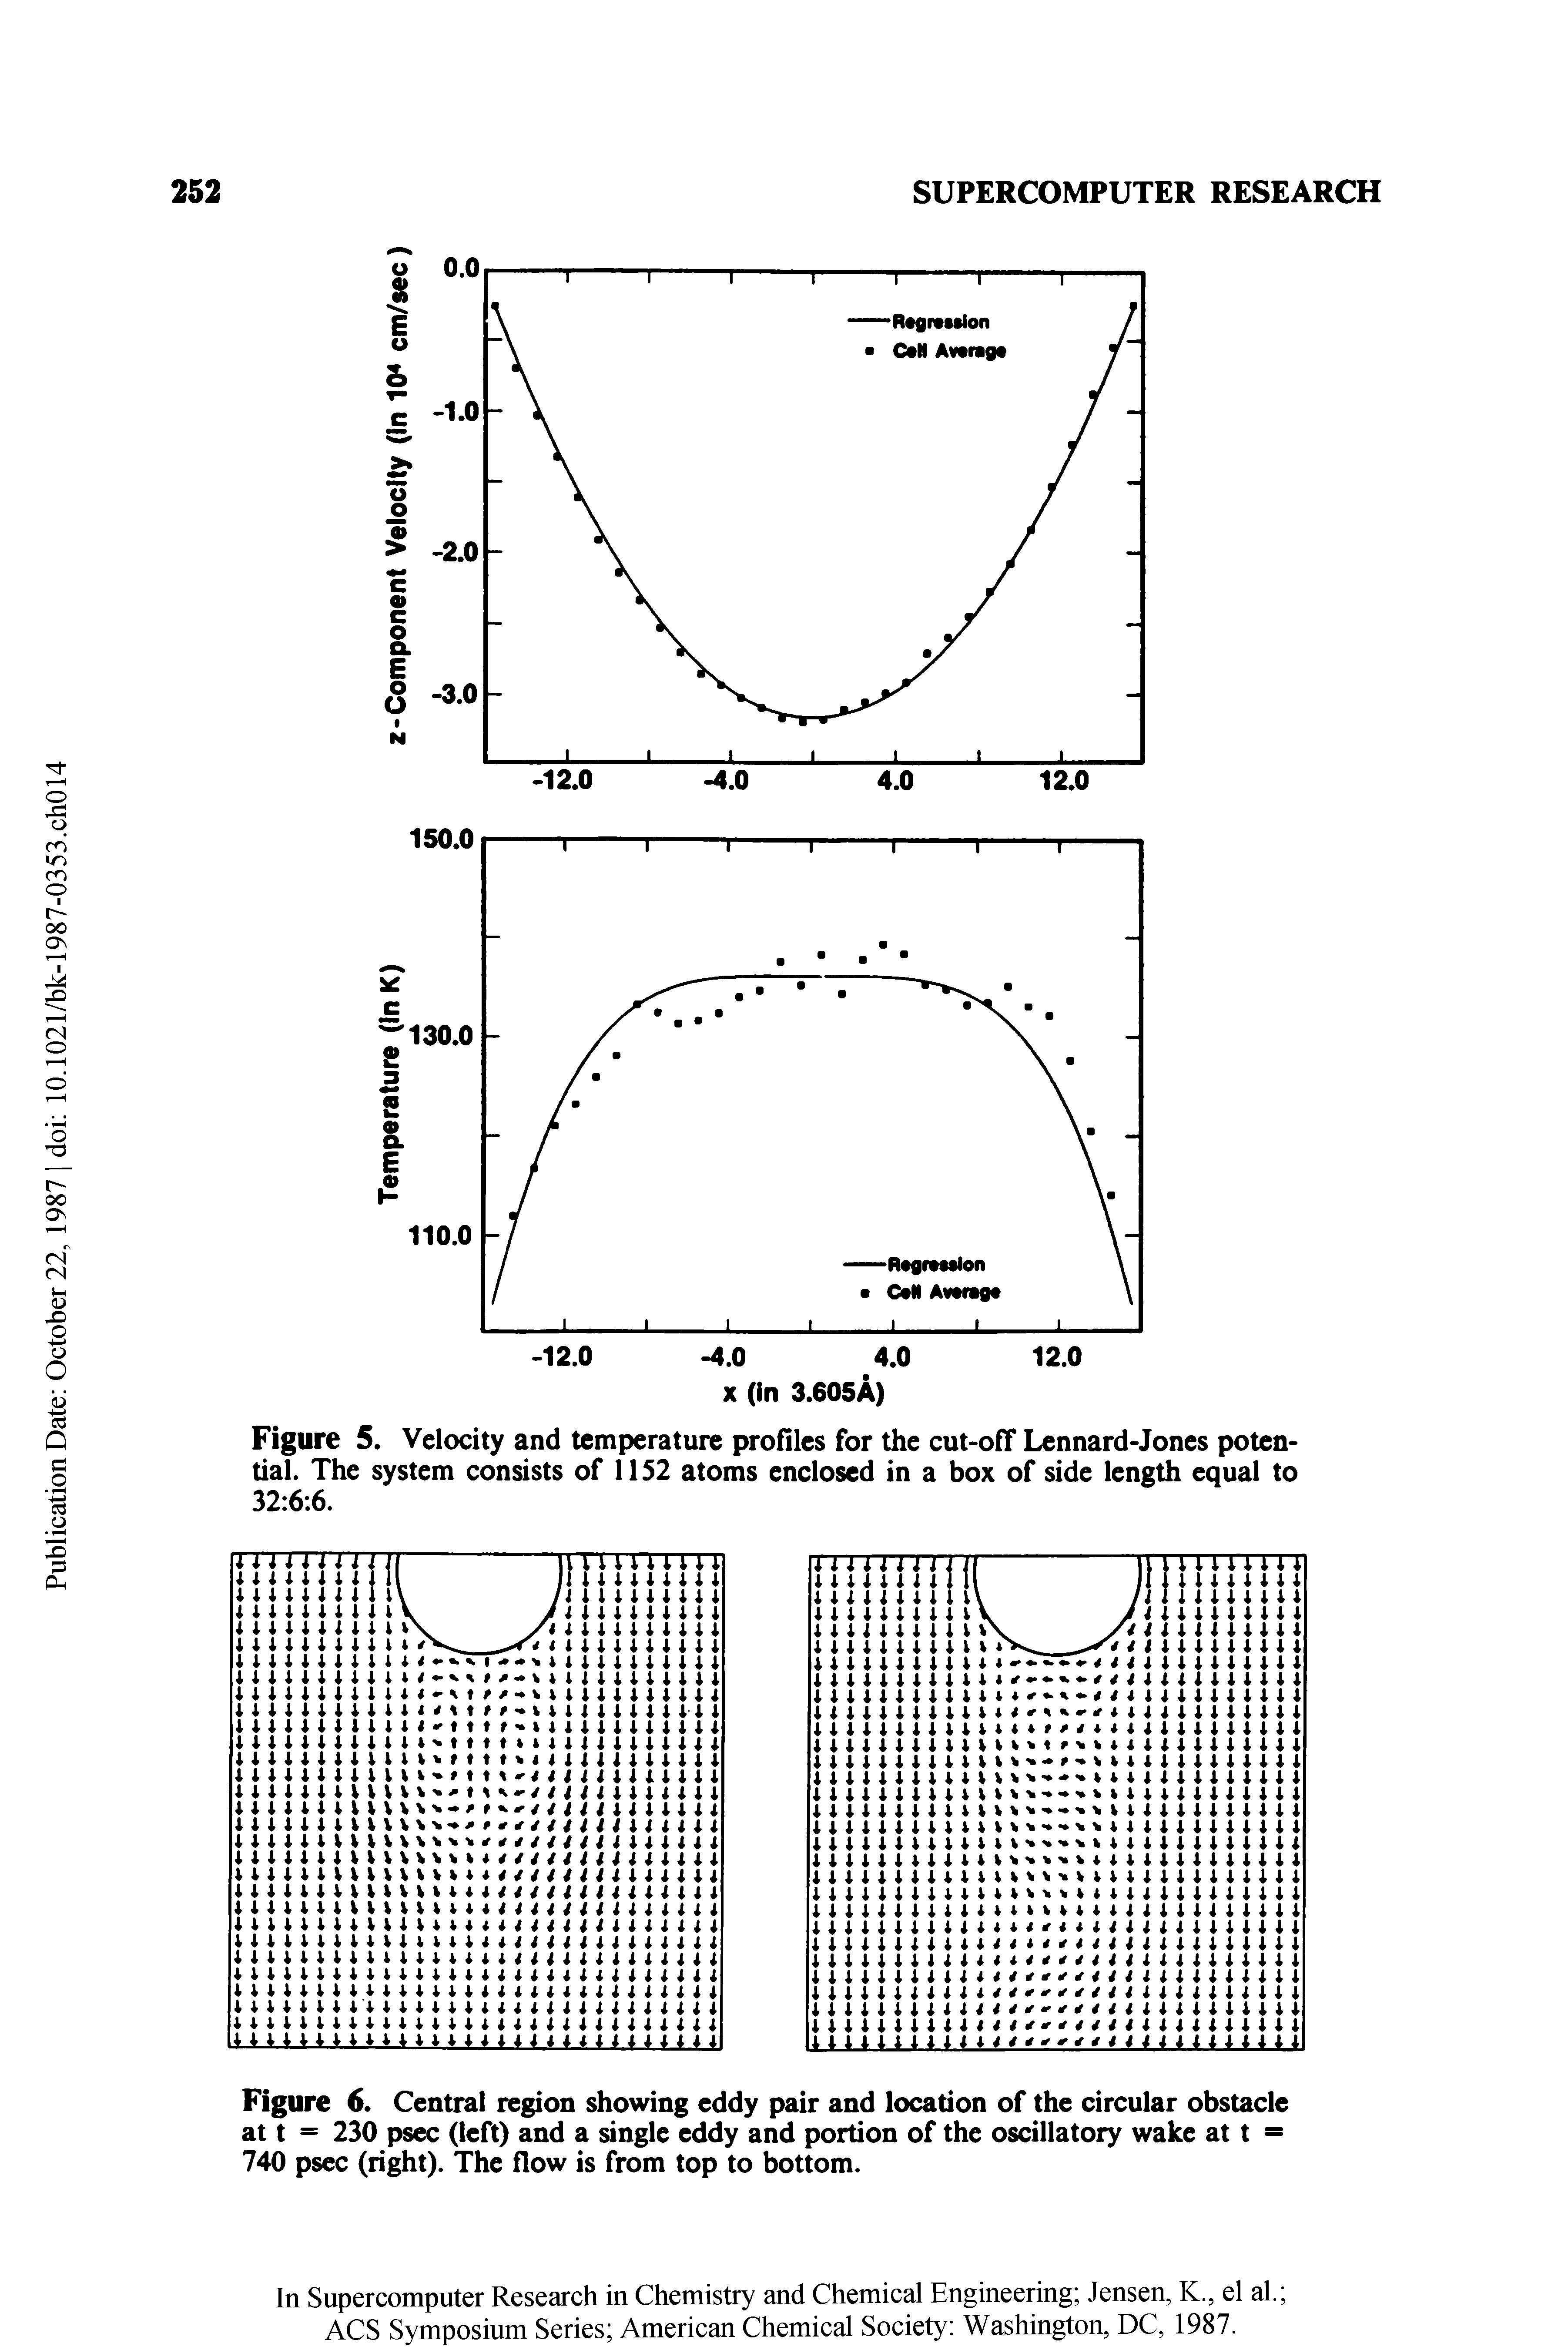 Figure 5. Velocity and temperature profiles for the cut-off Lennard-Jones potential. The system consists of 1152 atoms enclosed in a box of side length equal to 32 6 6.